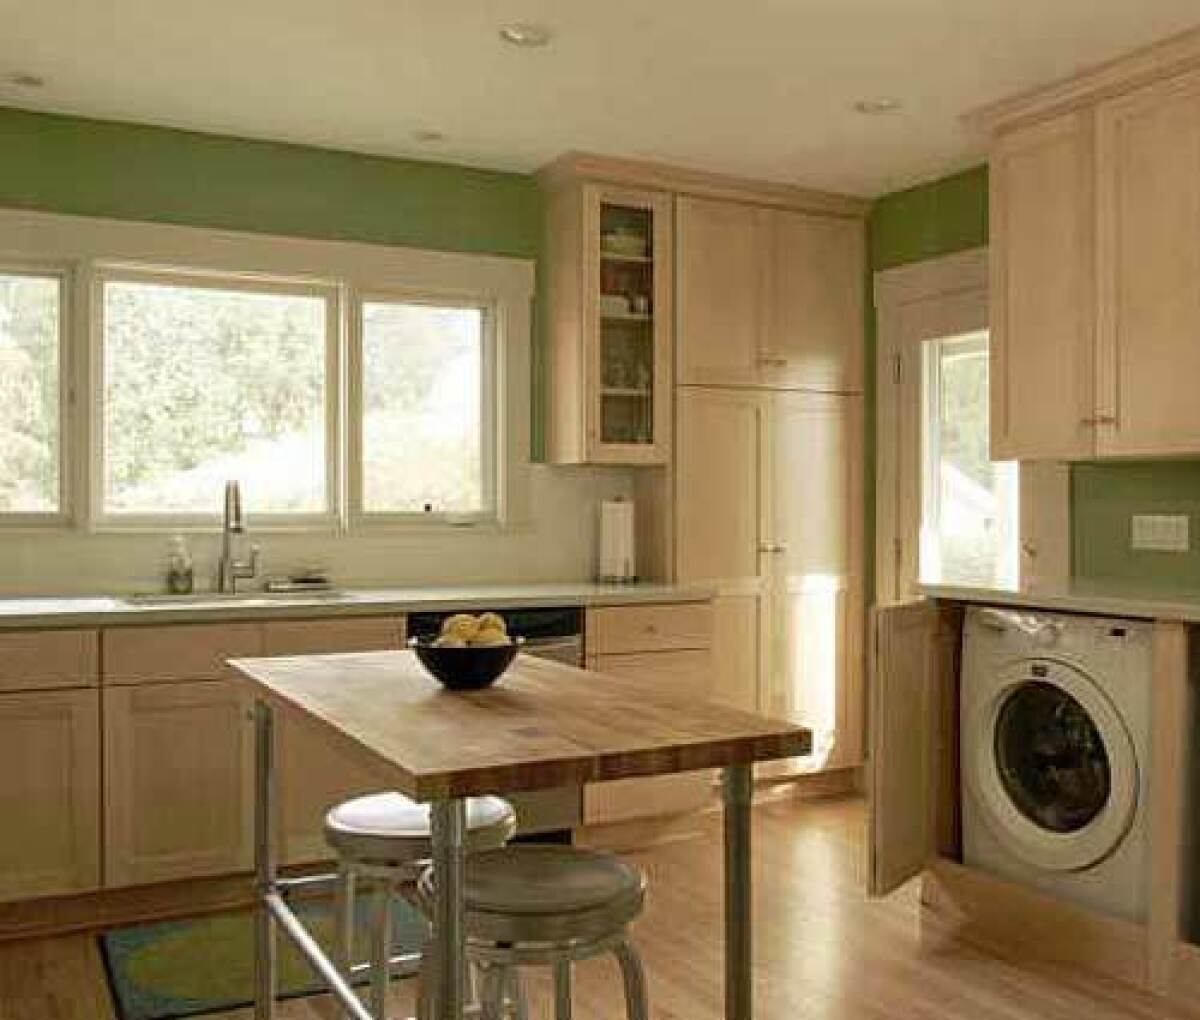 IN HIDING: A washer and dryer are neatly tucked into a cabinet in the kitchen, above. At right, a wide opening was created between the kitchen and dining rooms and framed with molding.